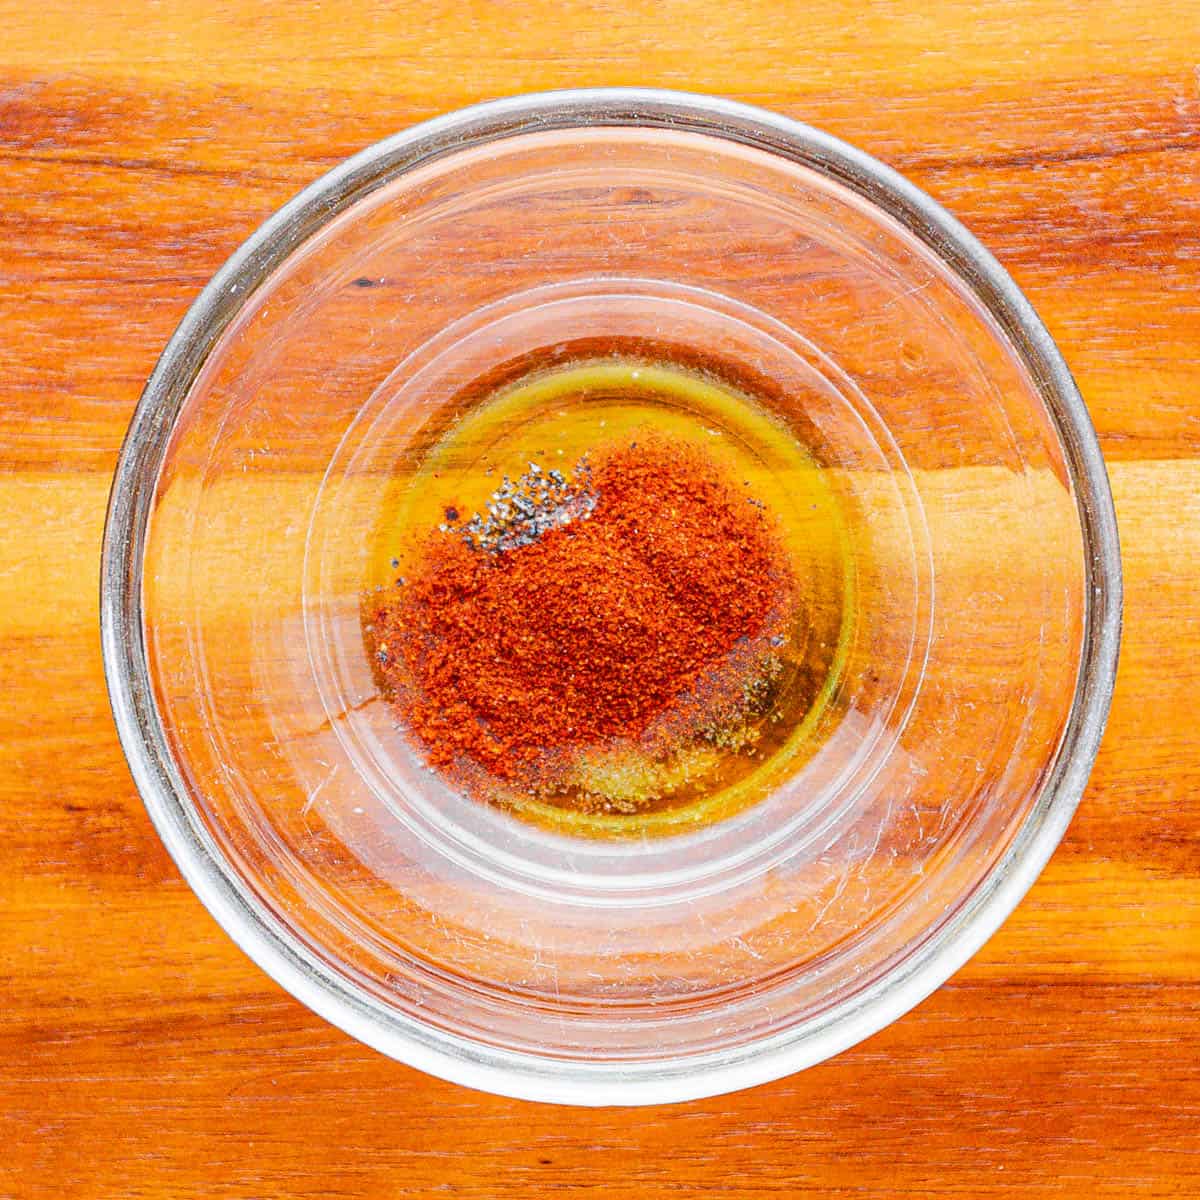 In a small bowl, mix together oil, paprika, salt, and black pepper.